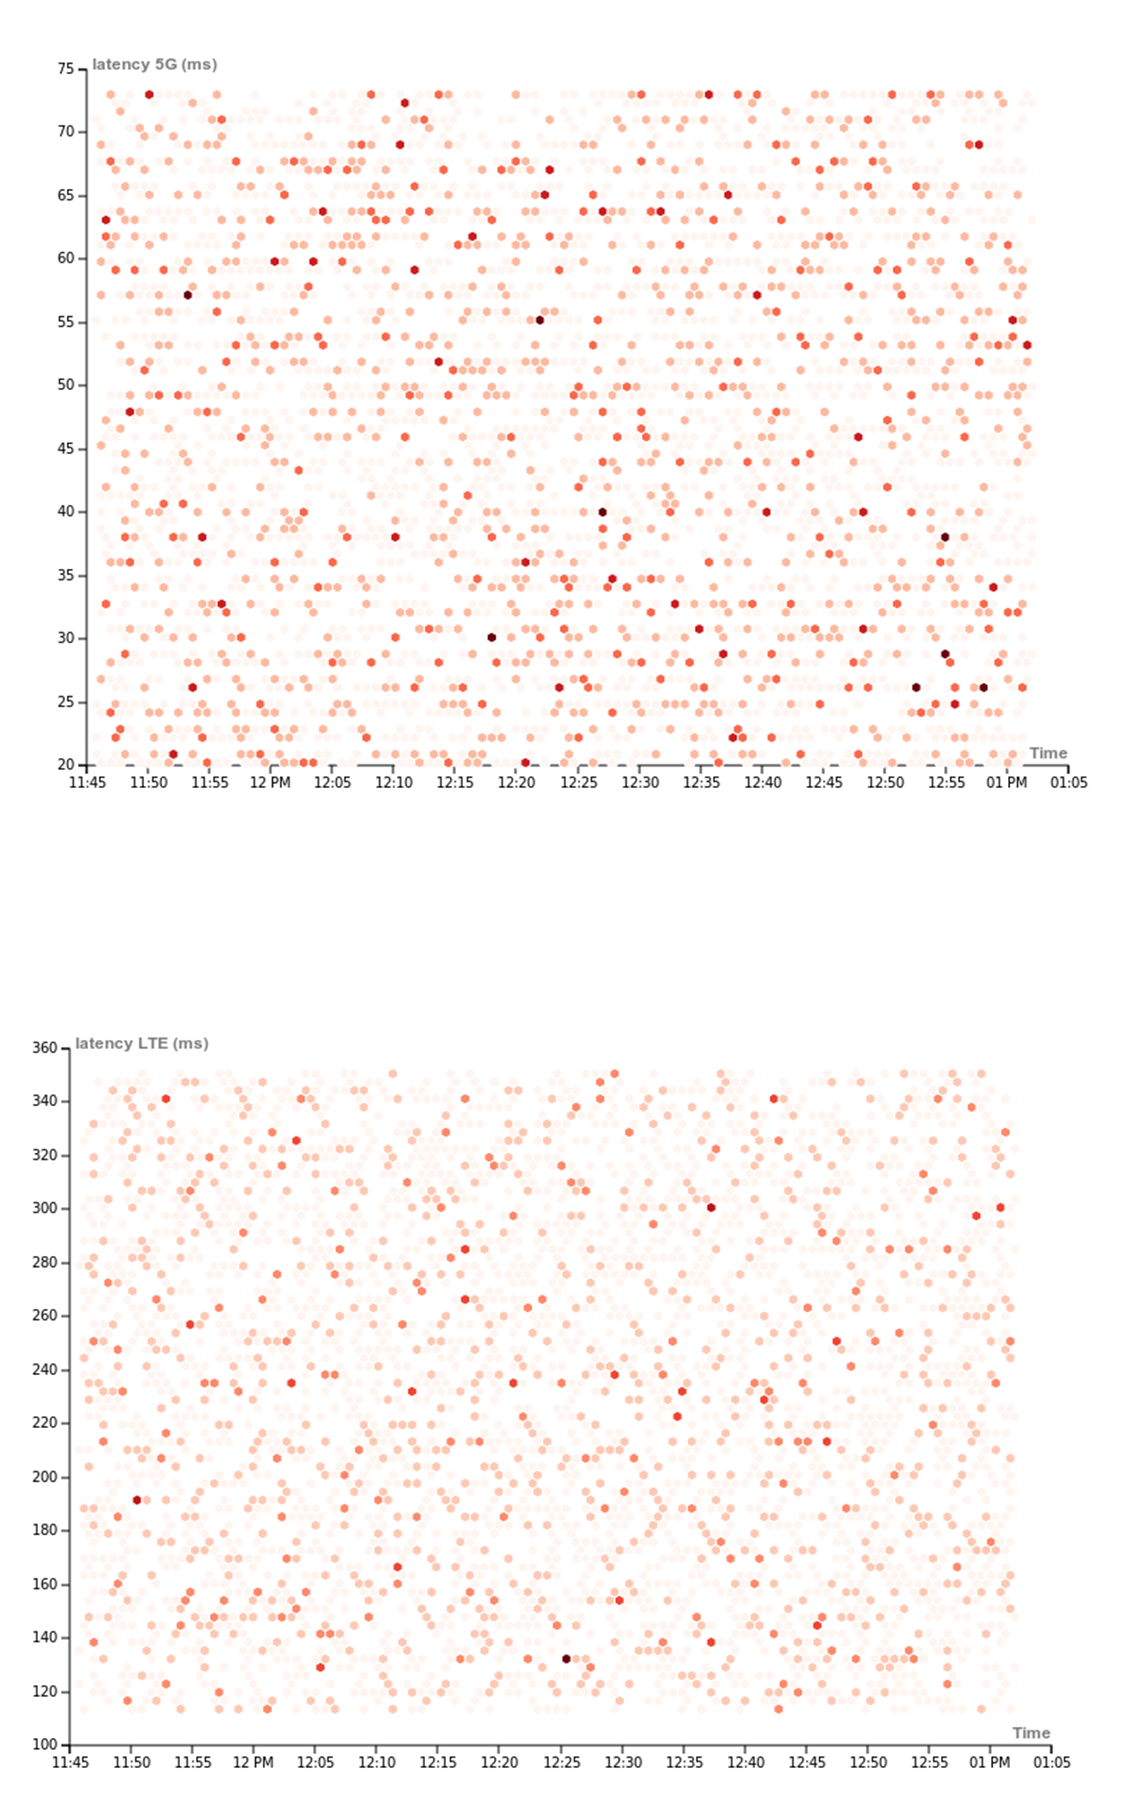 latency correlation and distribution over time